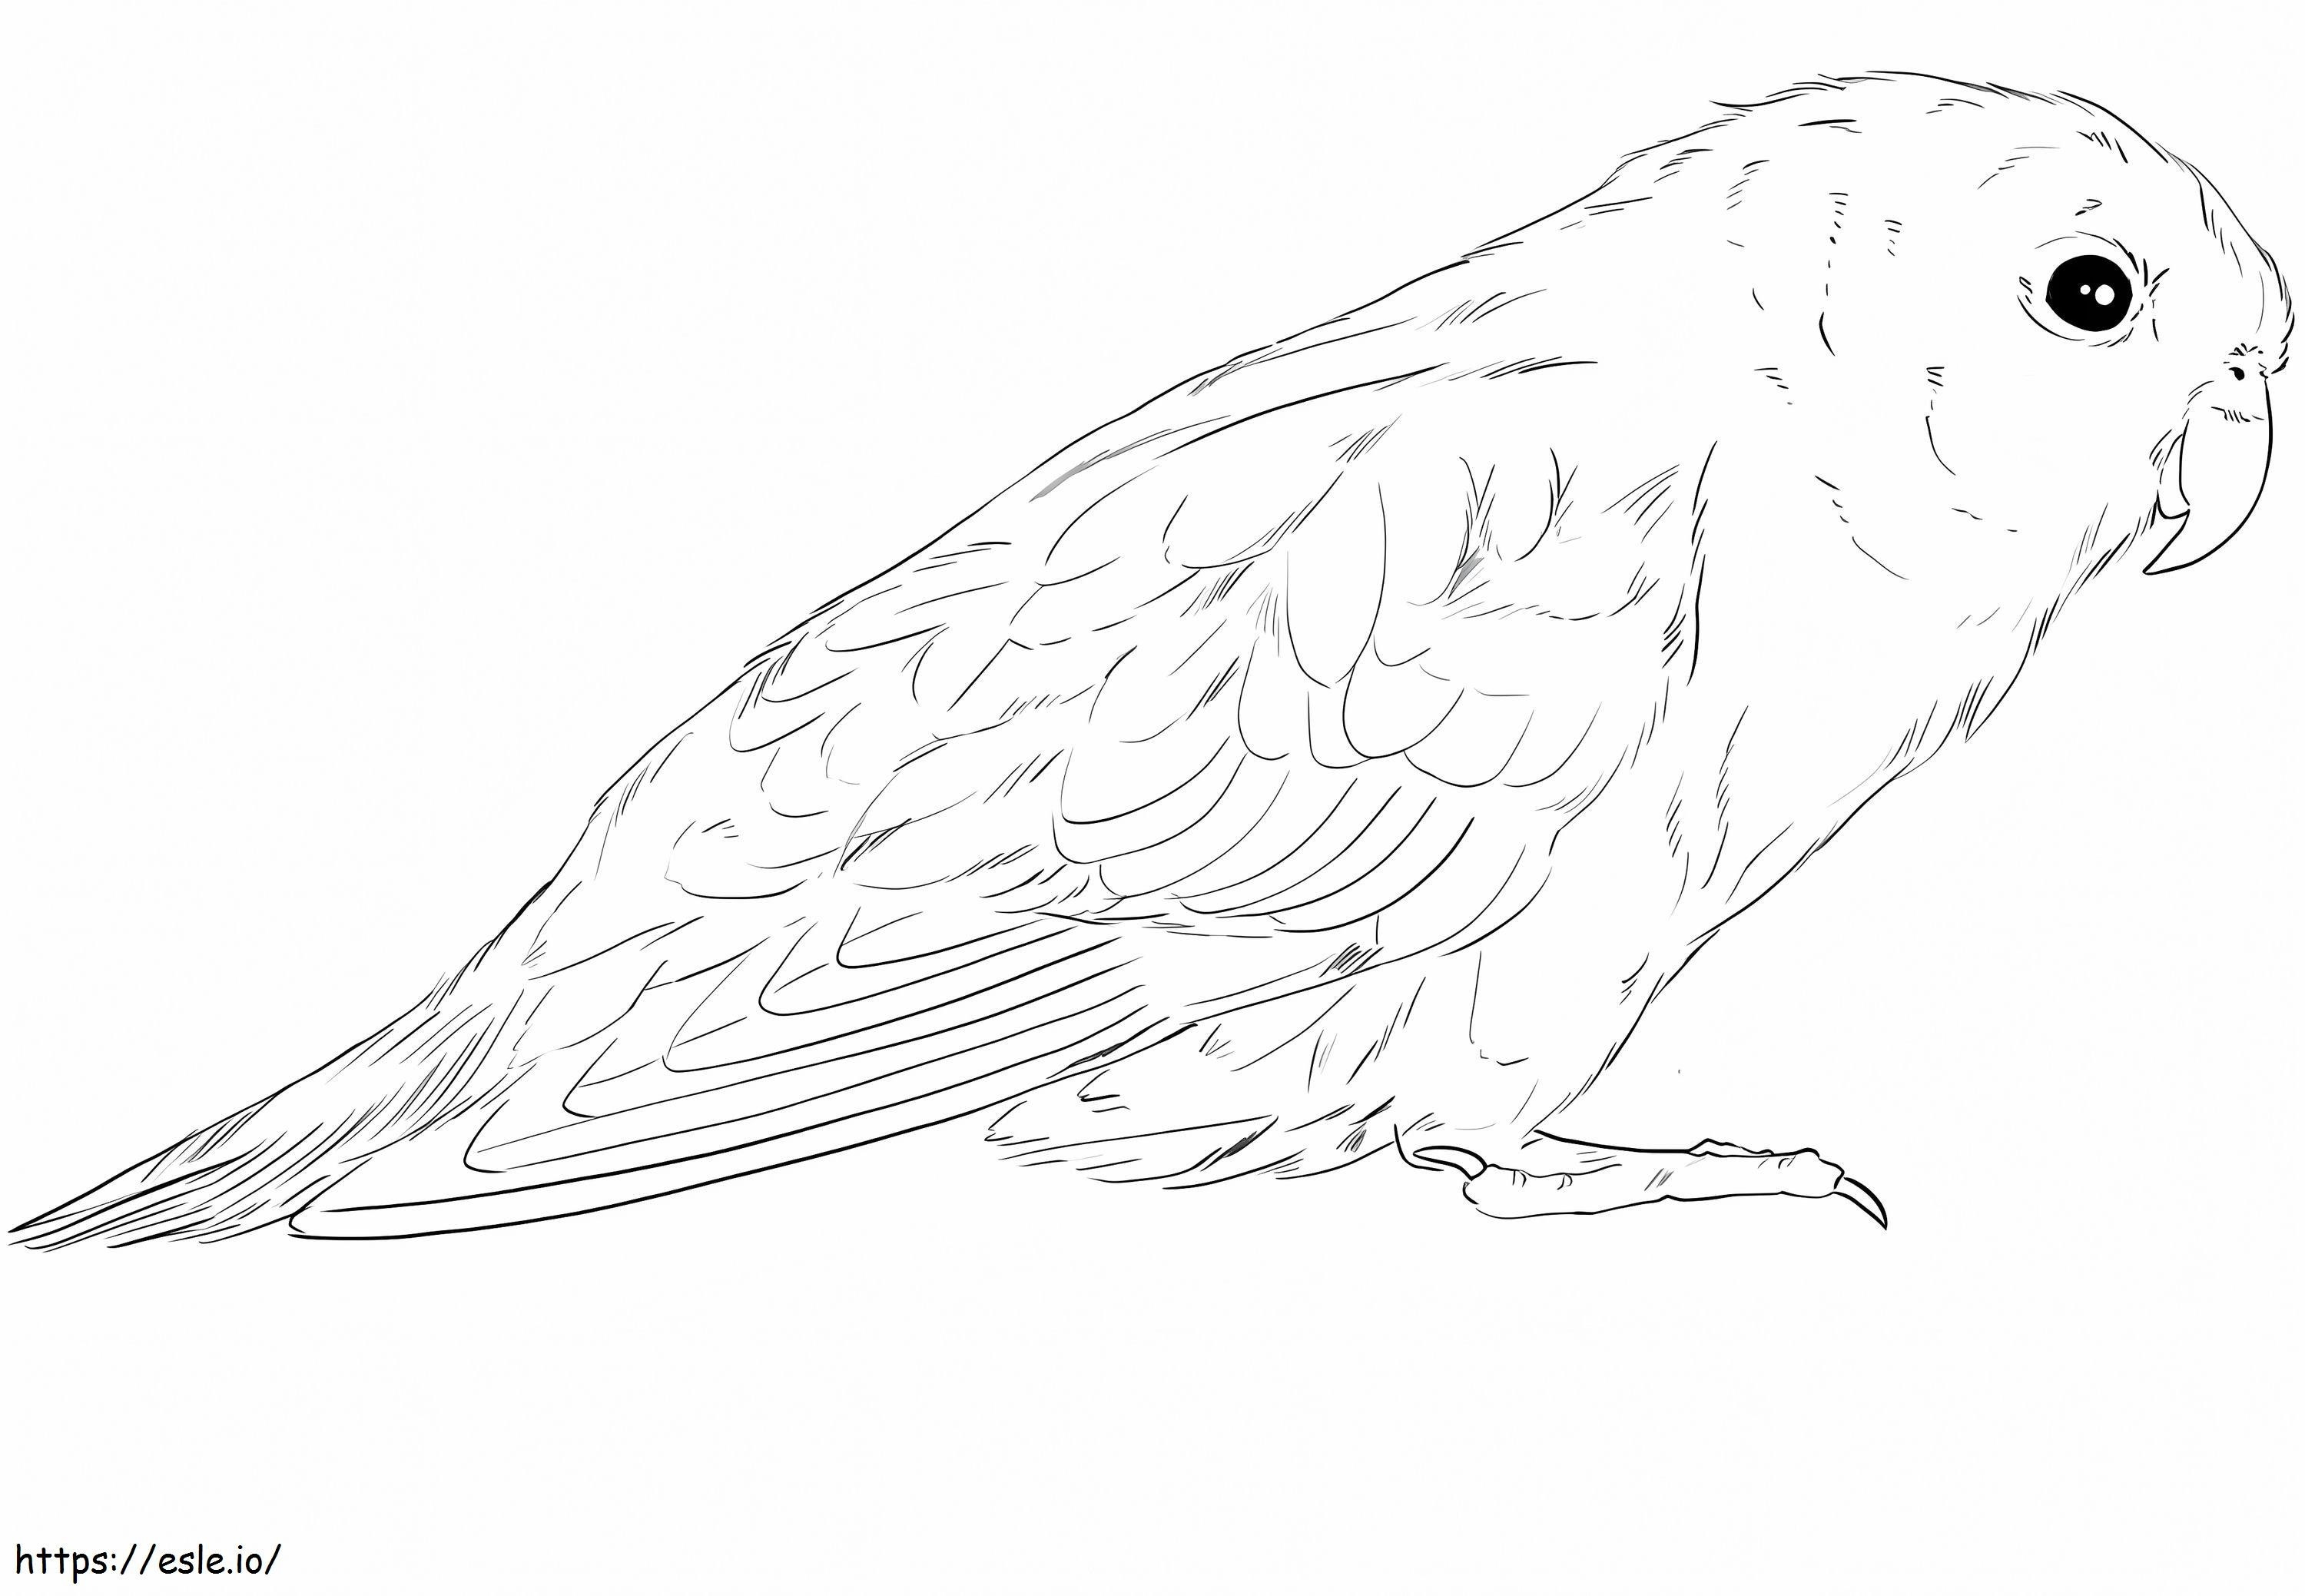 Barred Parakeet coloring page